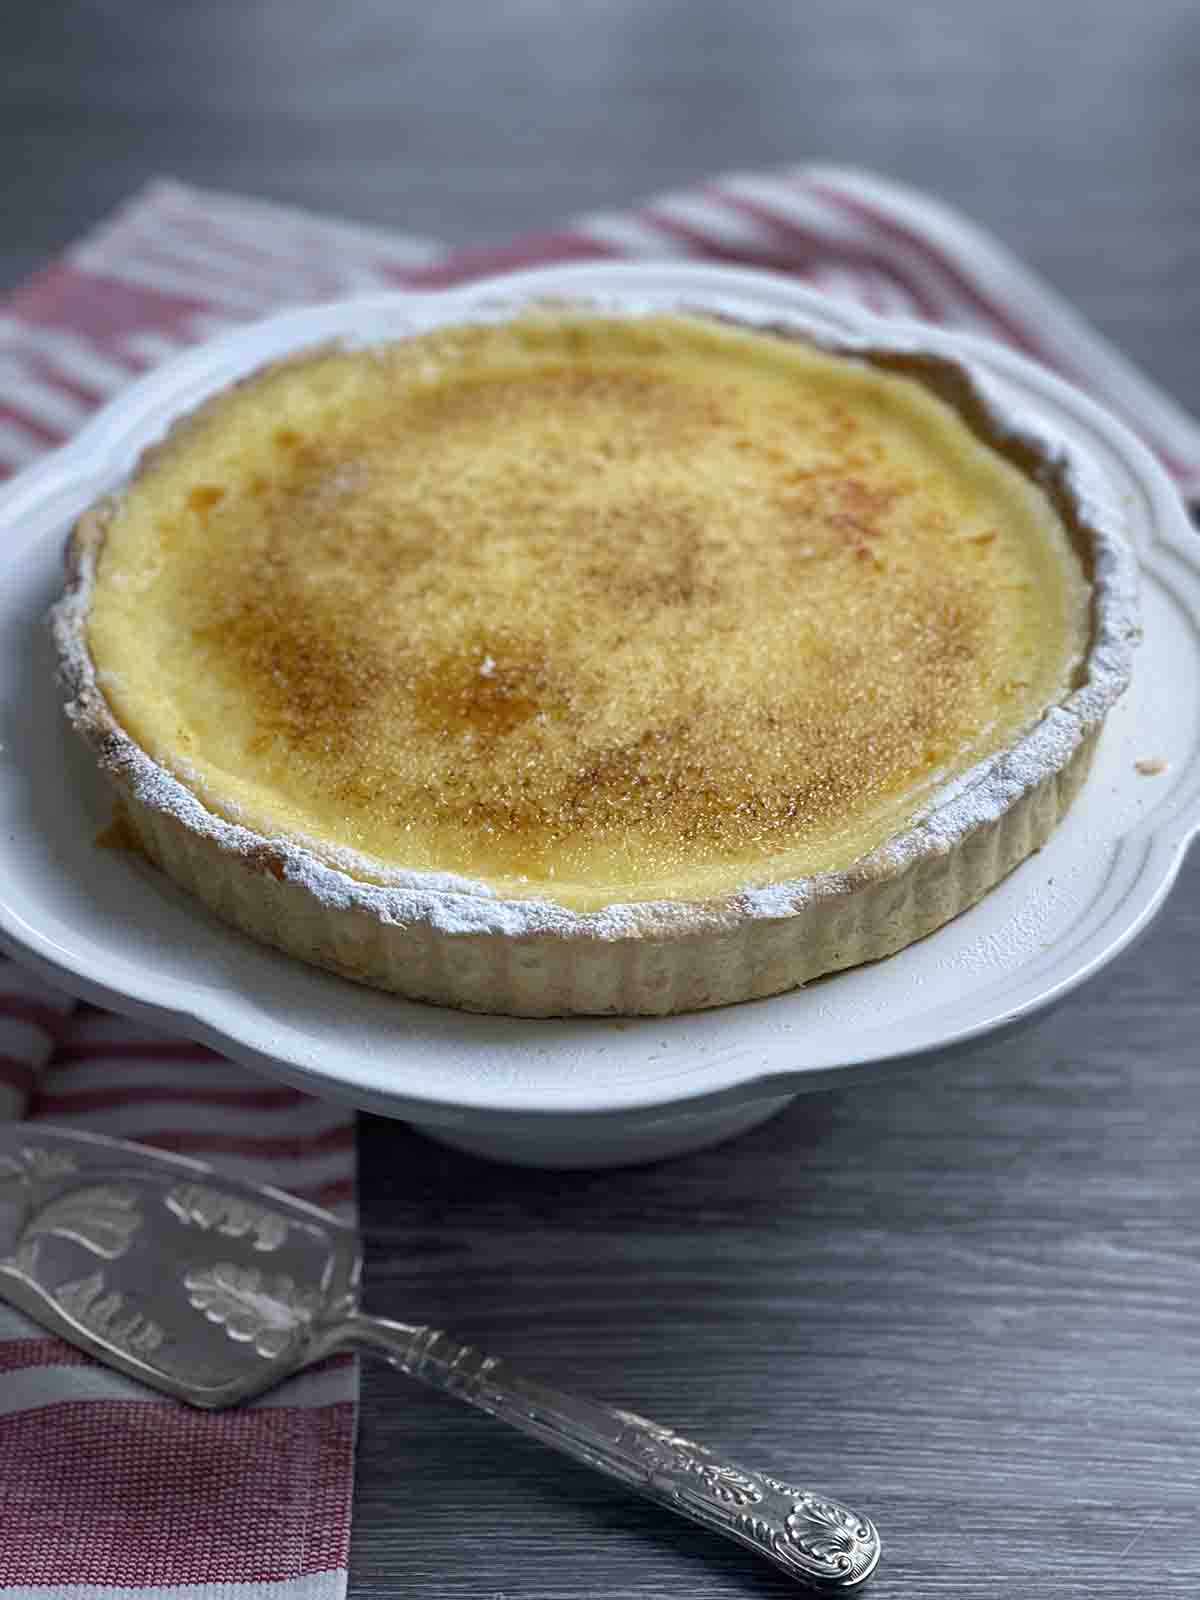 cooked tart with brulee top.